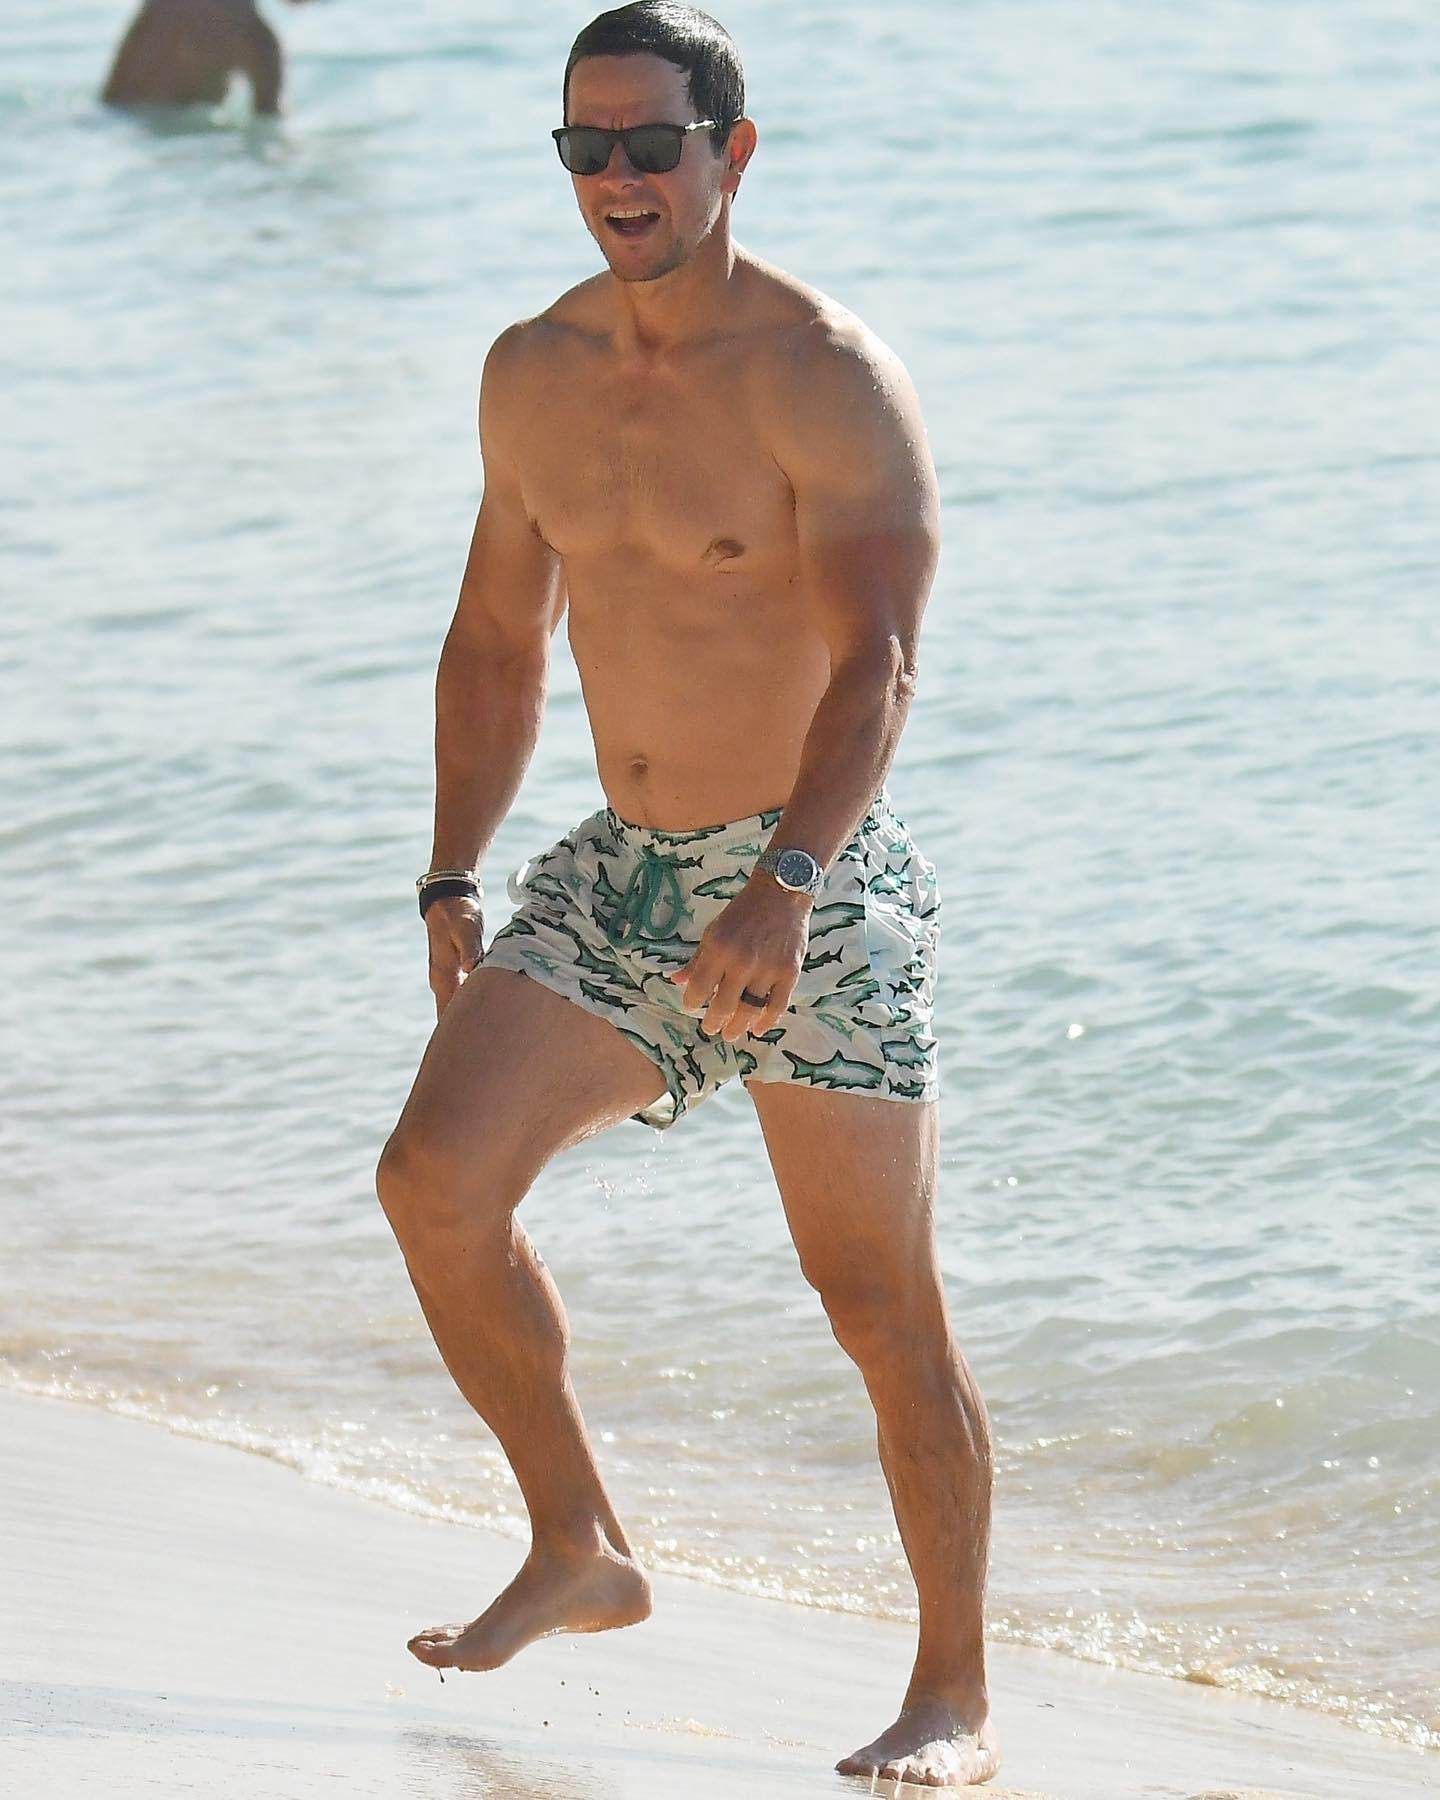 Just Jared - Mark Wahlberg sports a pair of shark-print swim trunks during another day at the beach